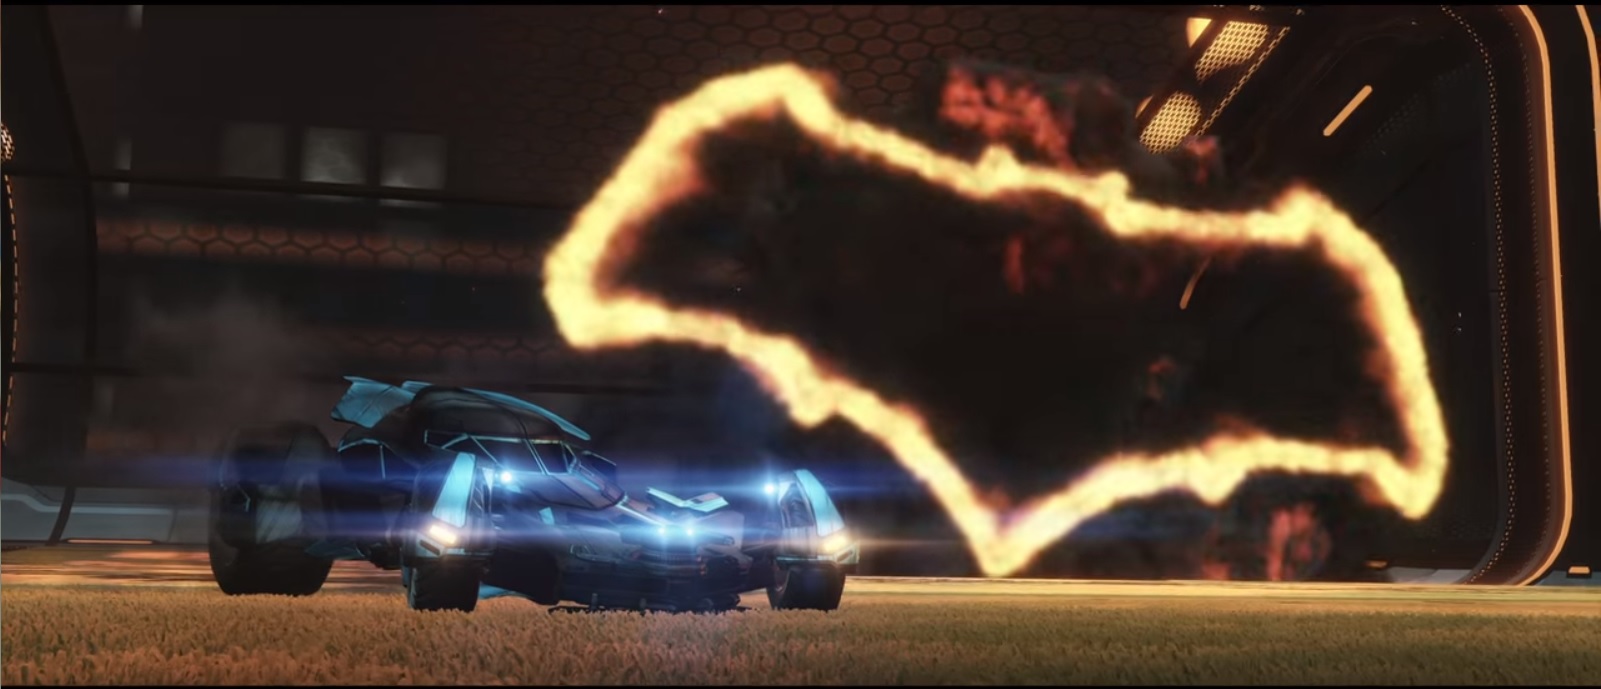 Batman’s car will be in Rocket League in upcoming Car Pack